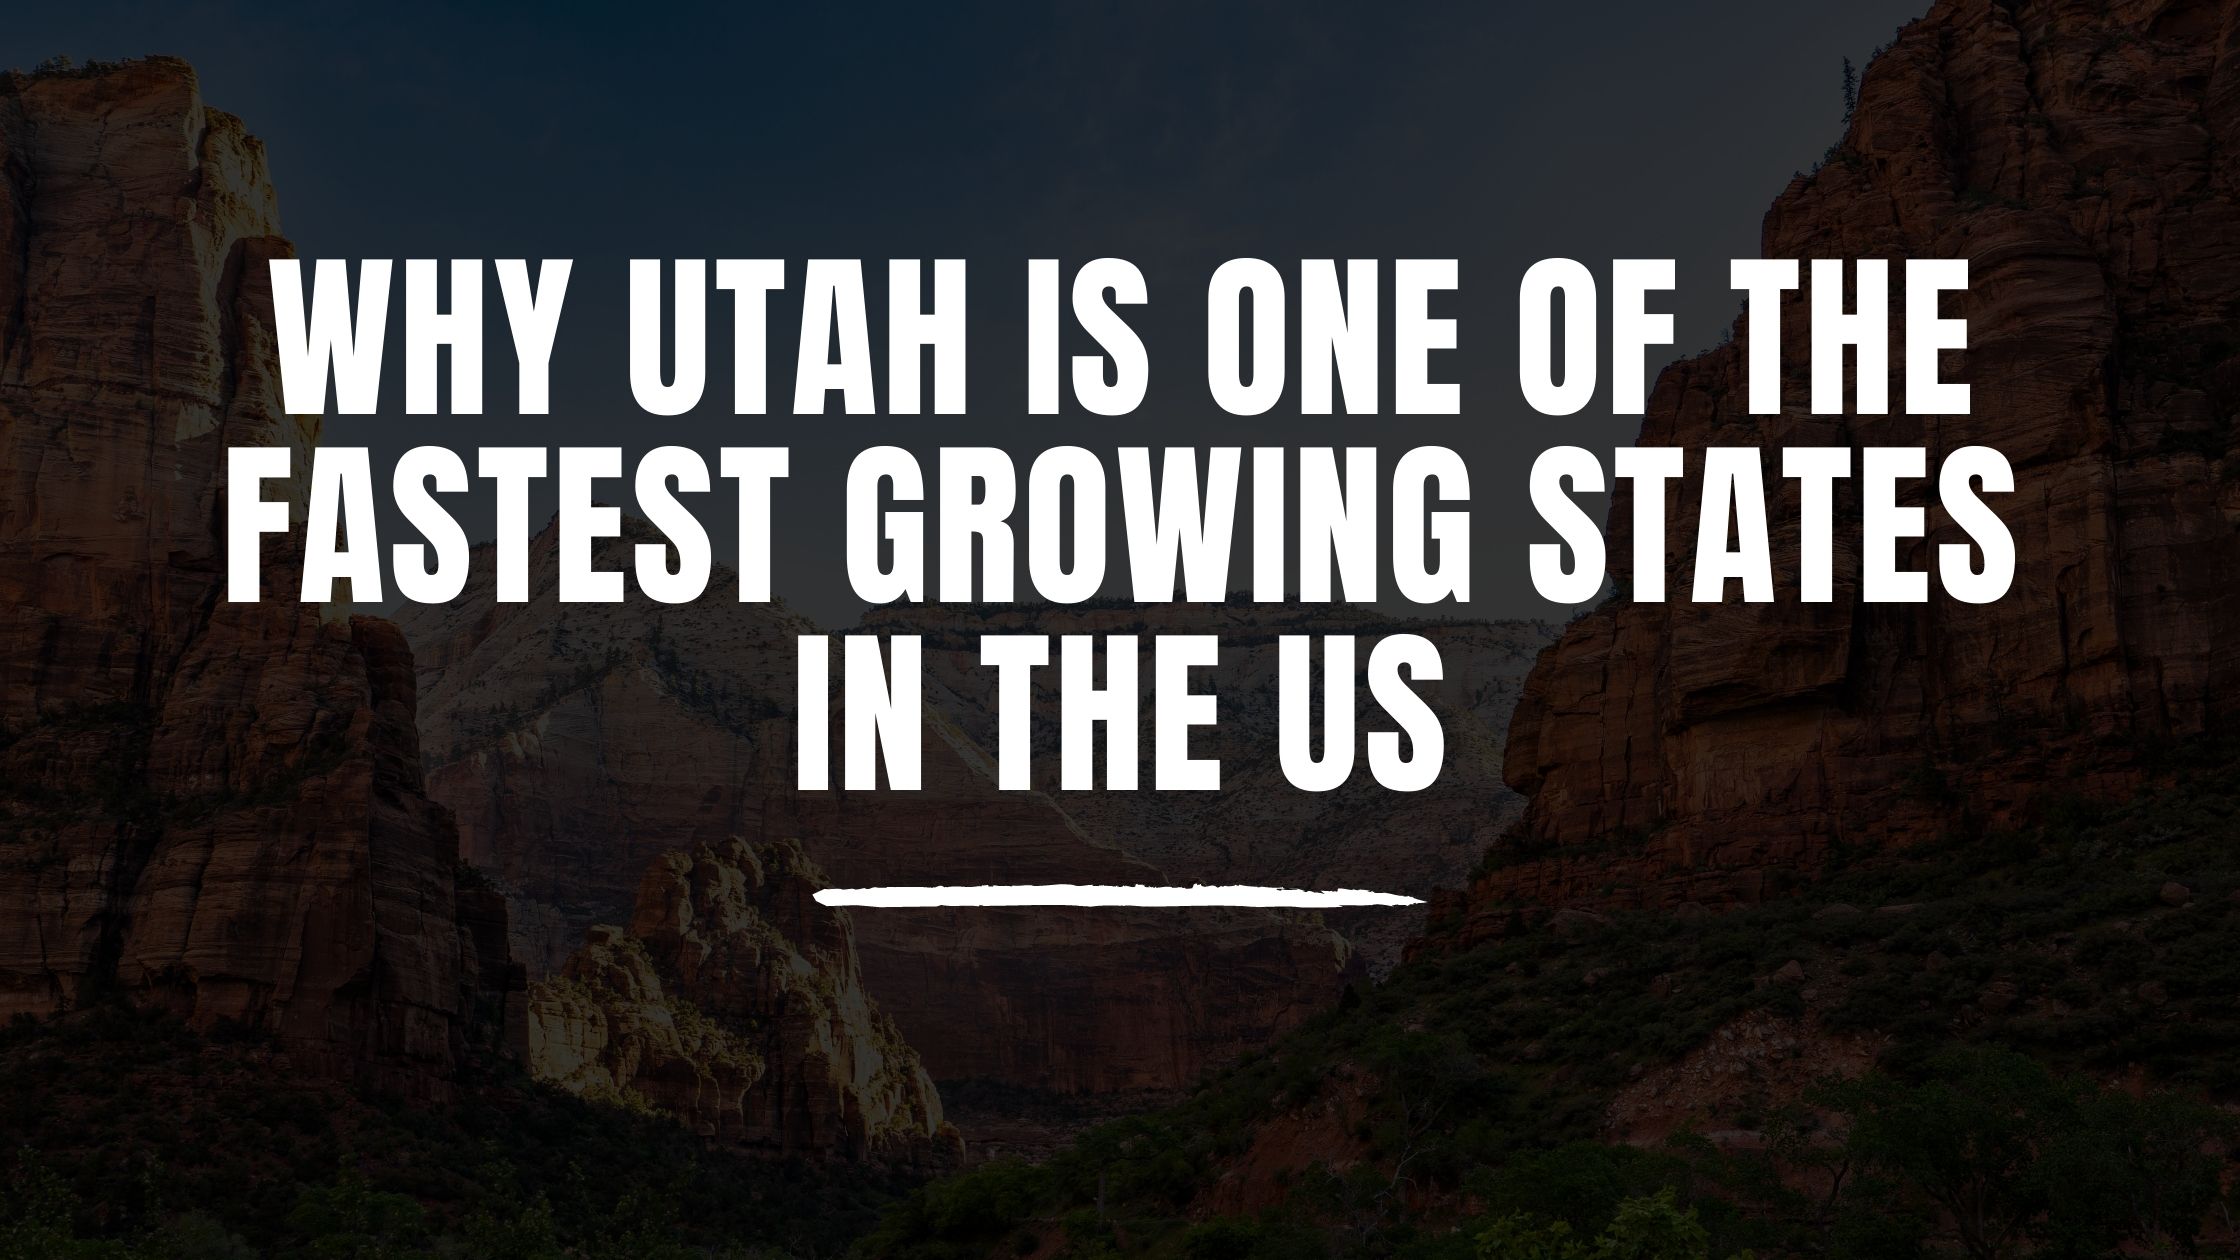 Why Utah Is One Of The Fastest Growing States In The US